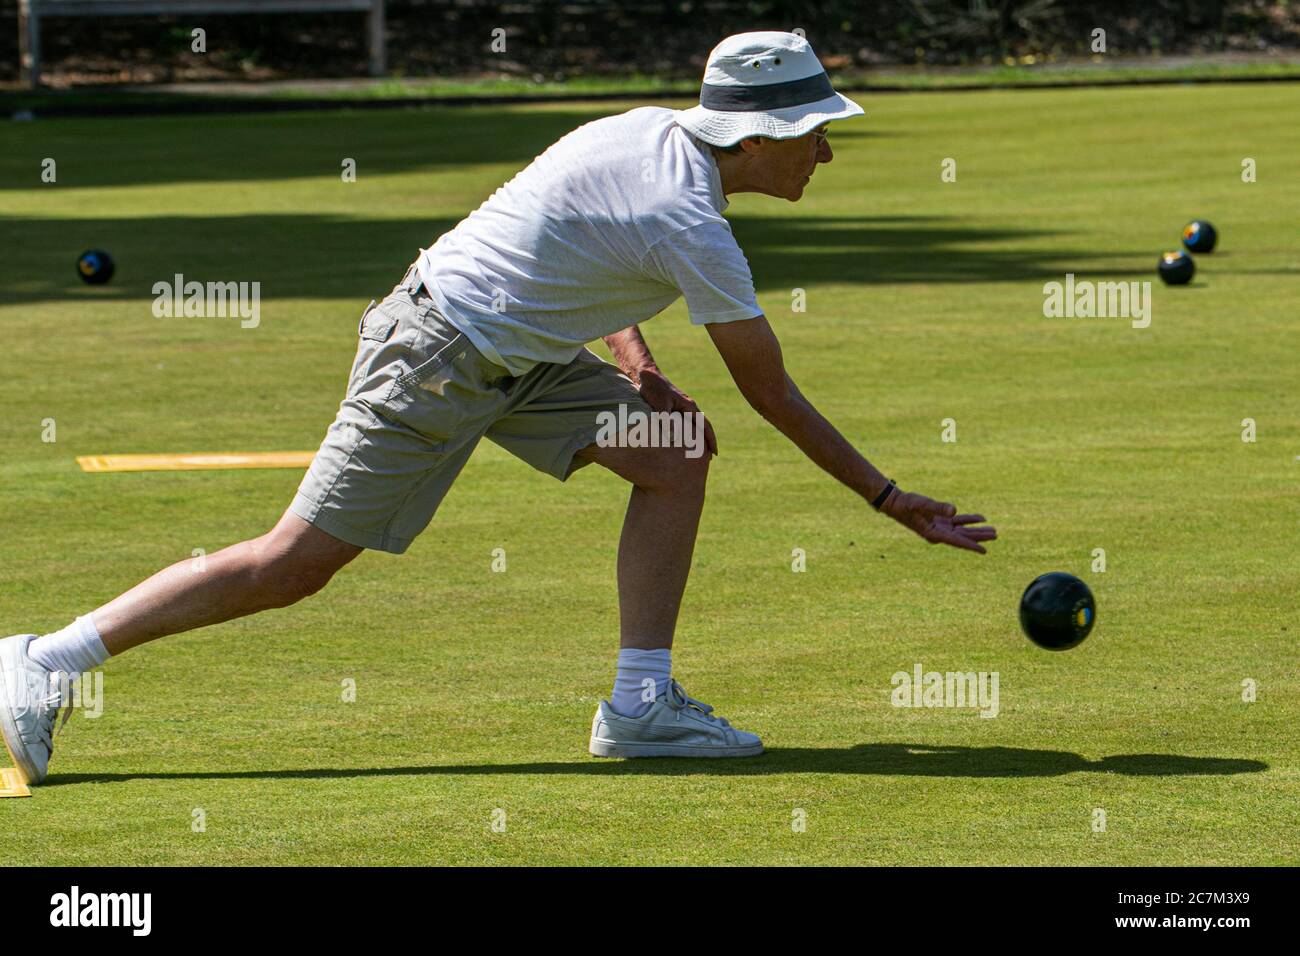 WIMBLEDON LONDON UK. 18th July, 2020. Members of the Wimbledon Park Bowls Club enjoy bowling outdoors on a hot summer day as lockdown restrictions are lifted and sport facilities reopen. Credit: amer ghazzal/Alamy Live News Stock Photo